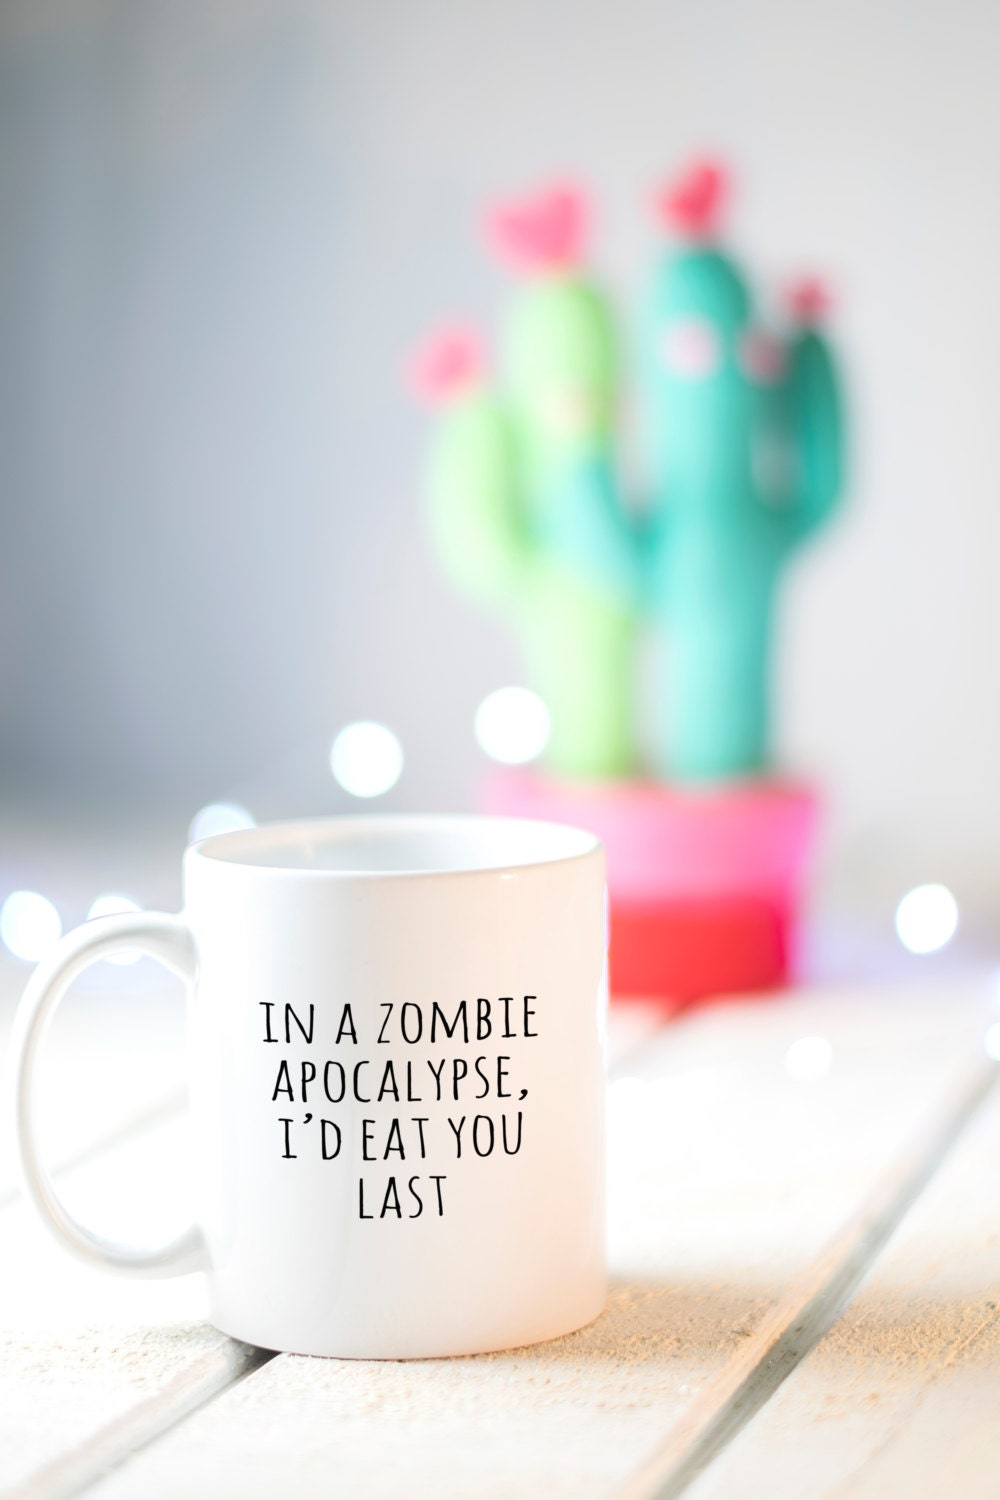 Funny Valentine's Day Gift, in a zombie apocalypse I'd eat you last, Funny Mug, Gift for Him, Girlfriend Gift, Funny Gifts for Couples,